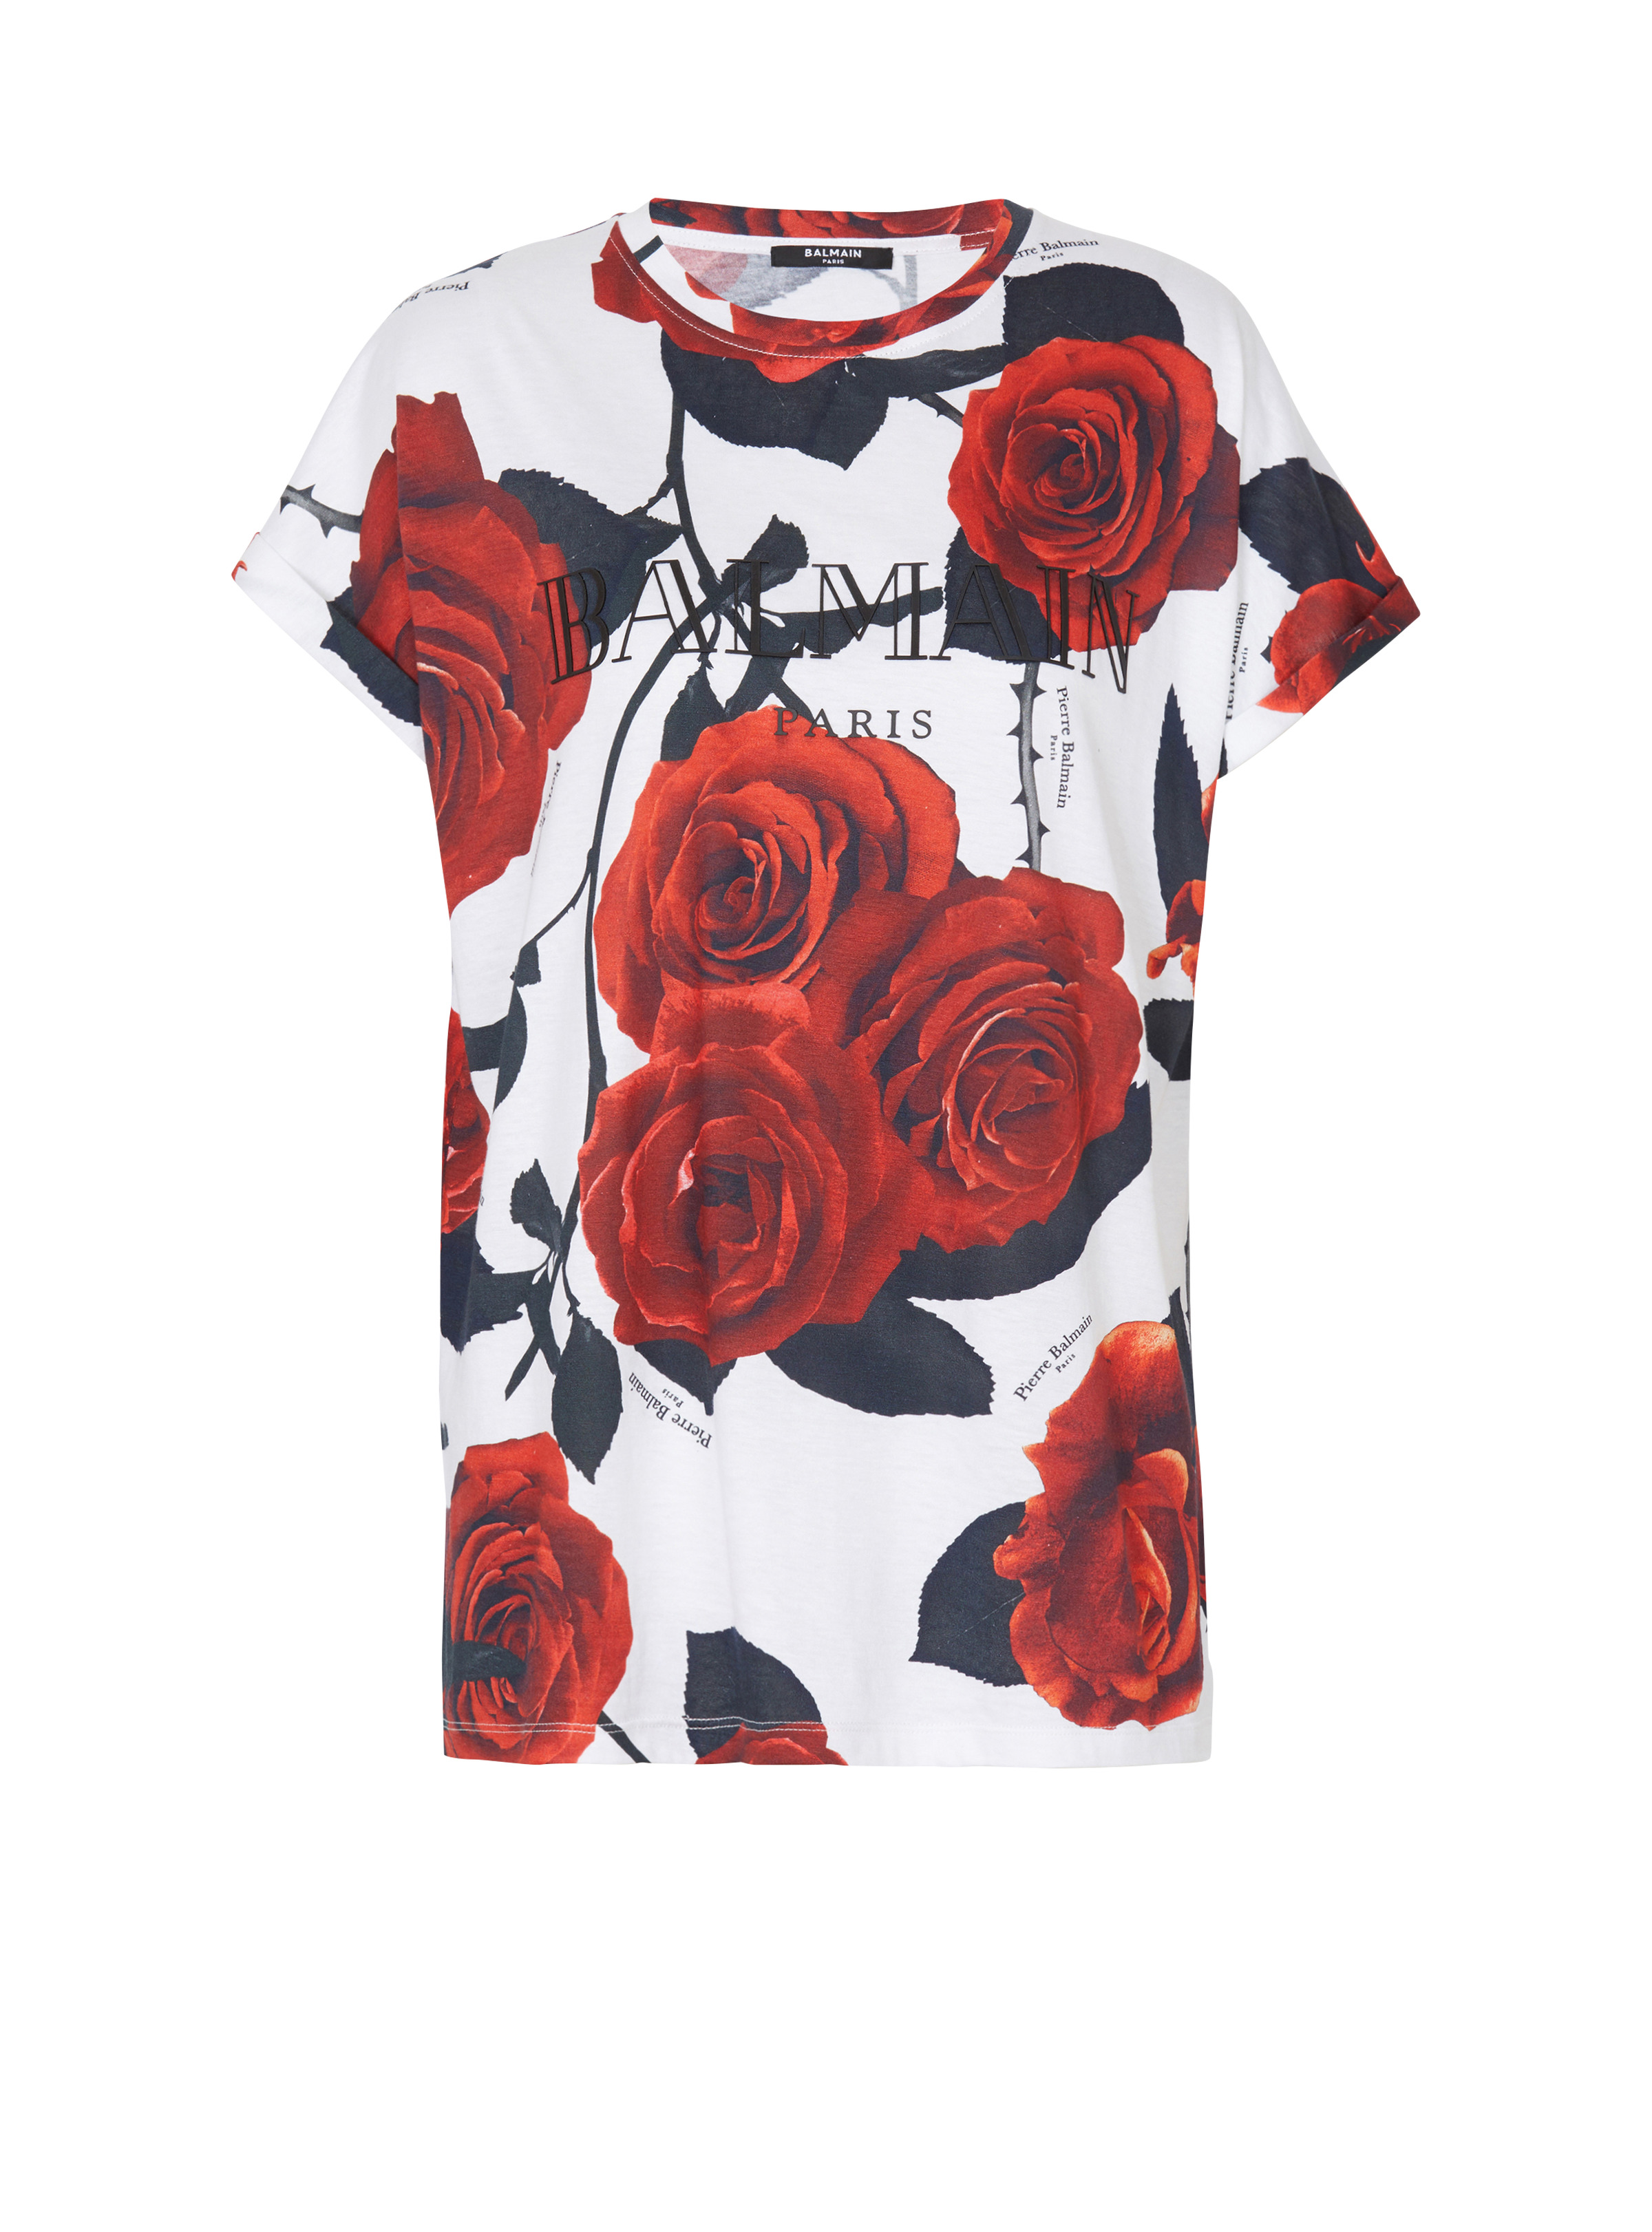 Vintage Balmain T-shirt with Red Roses print - 1